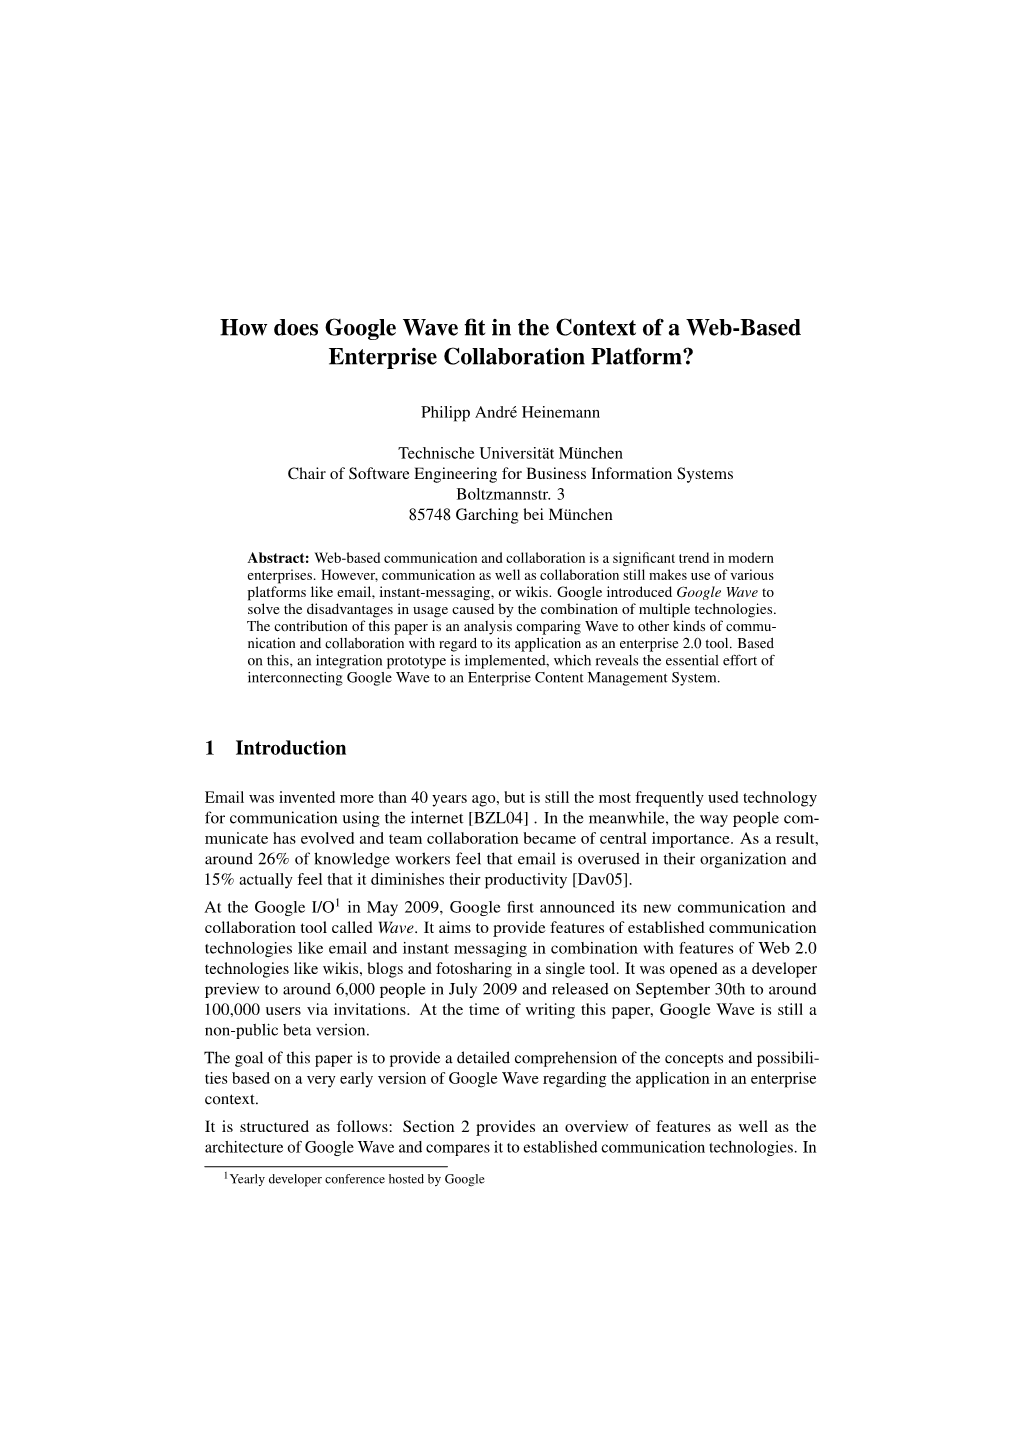 How Does Google Wave Fit in the Context of a Web-Based Enterprise